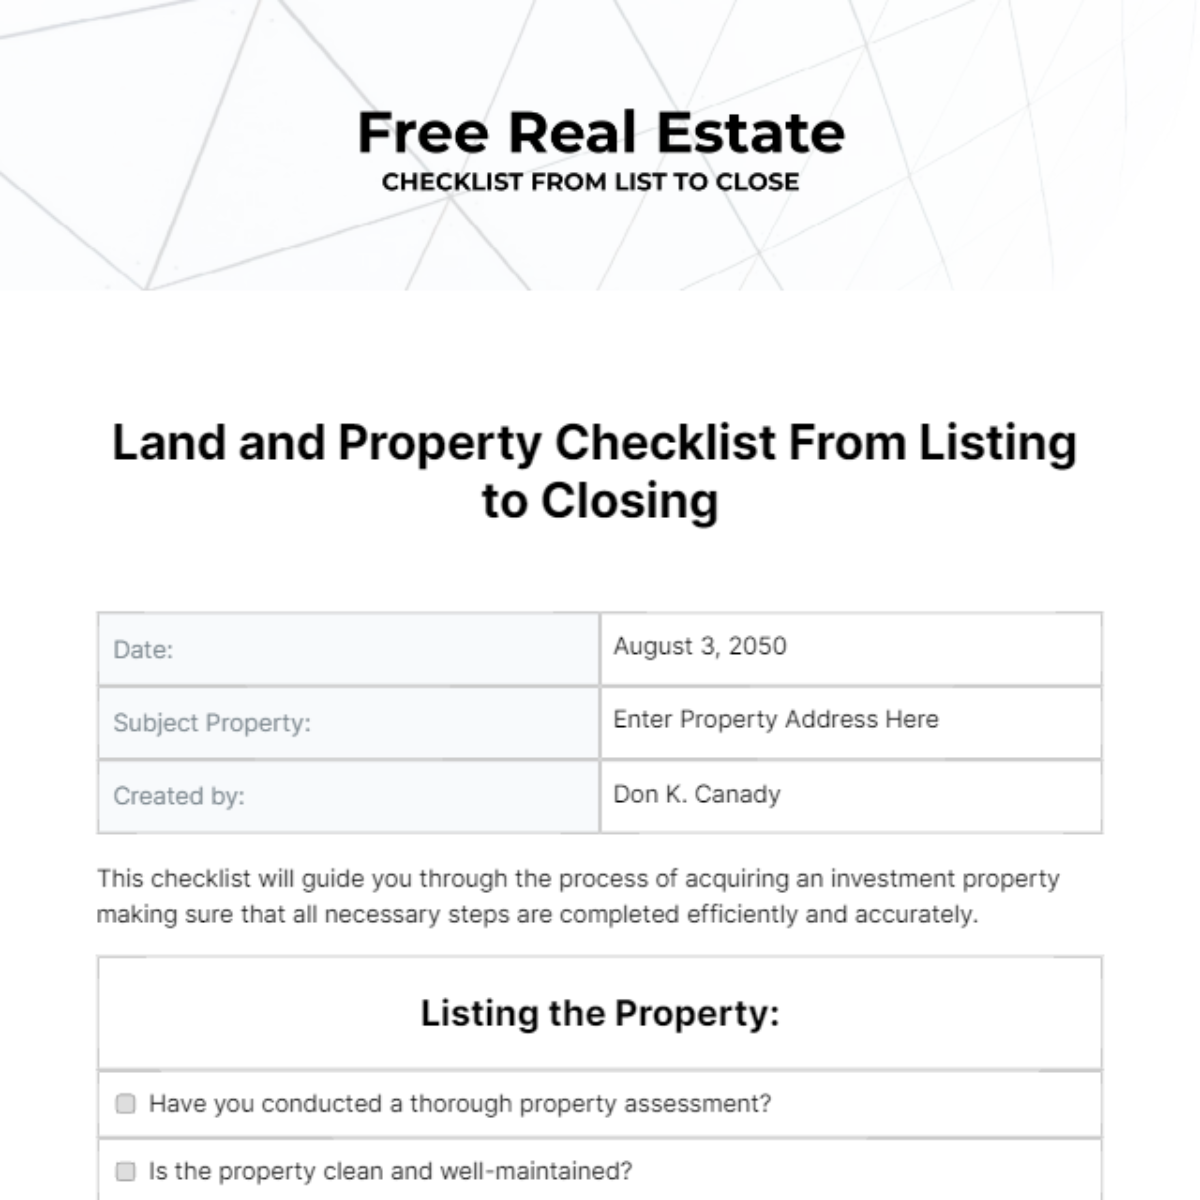 Real Estate Checklist from List to Close Template